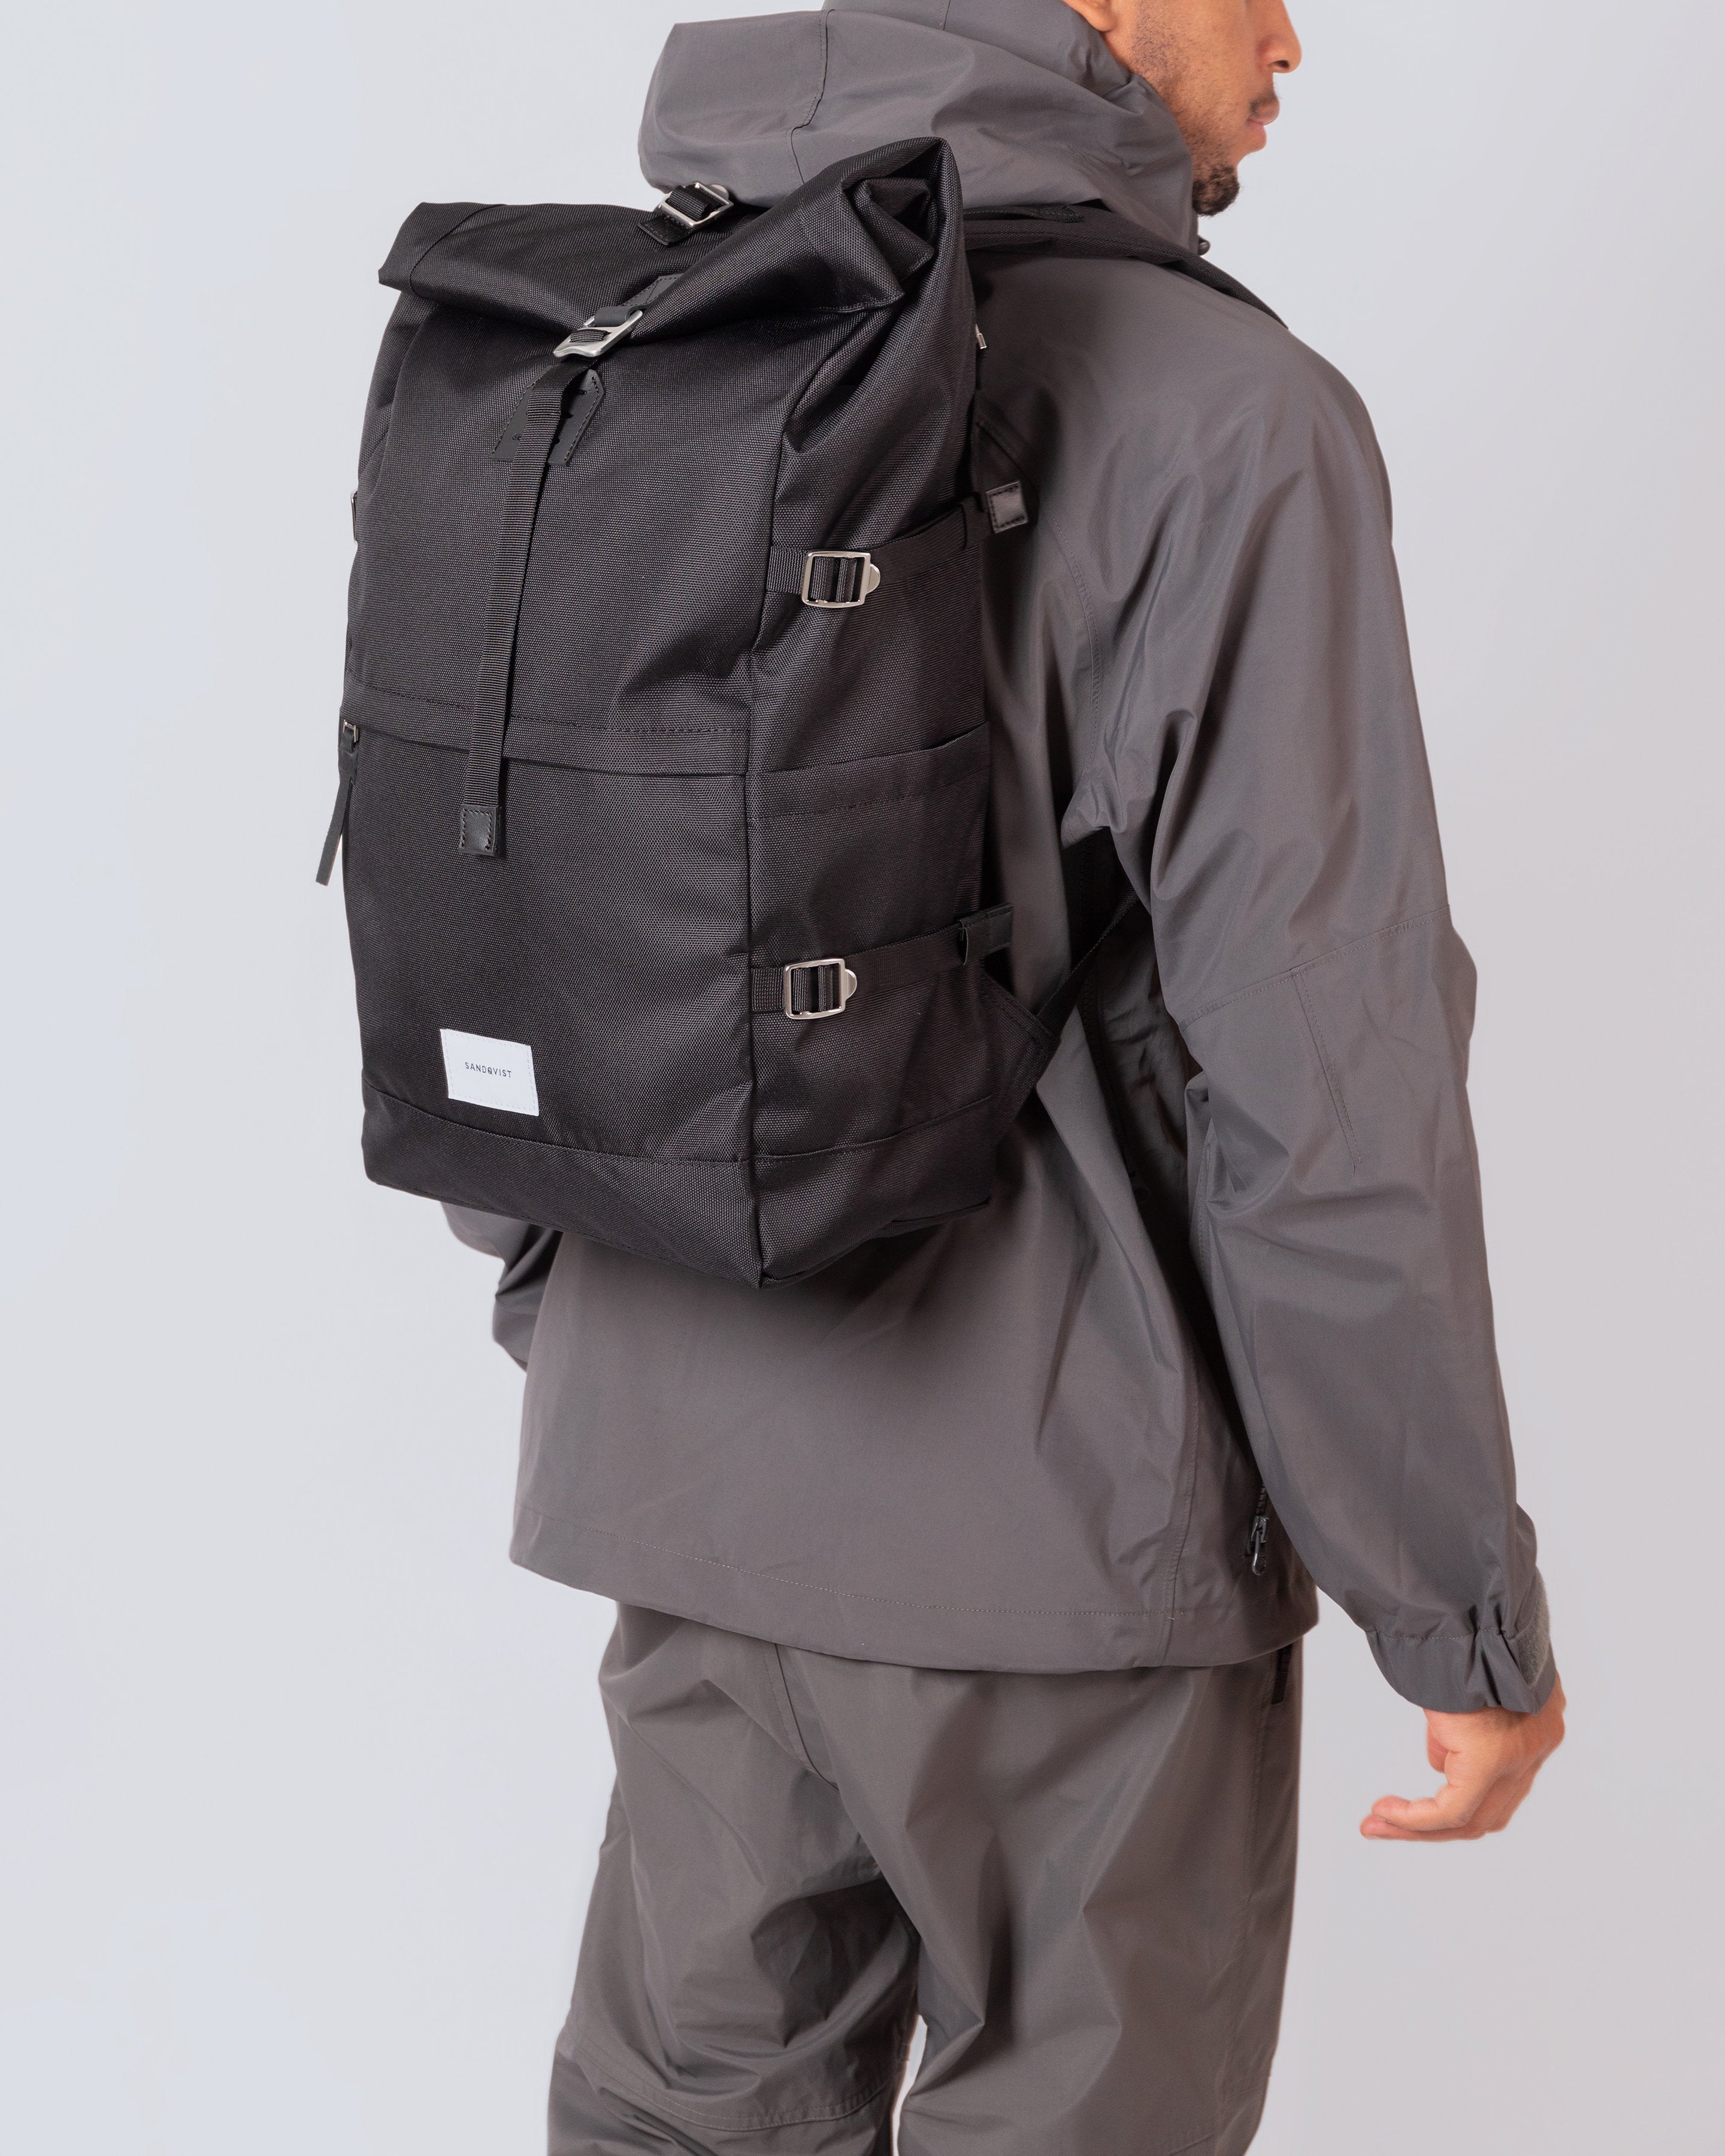 Sandqvist Bernt Backpack in Black SQA1039 Black with black webbing | Shop from eightywingold an official brand partner for Sandqvist Canada and US. 